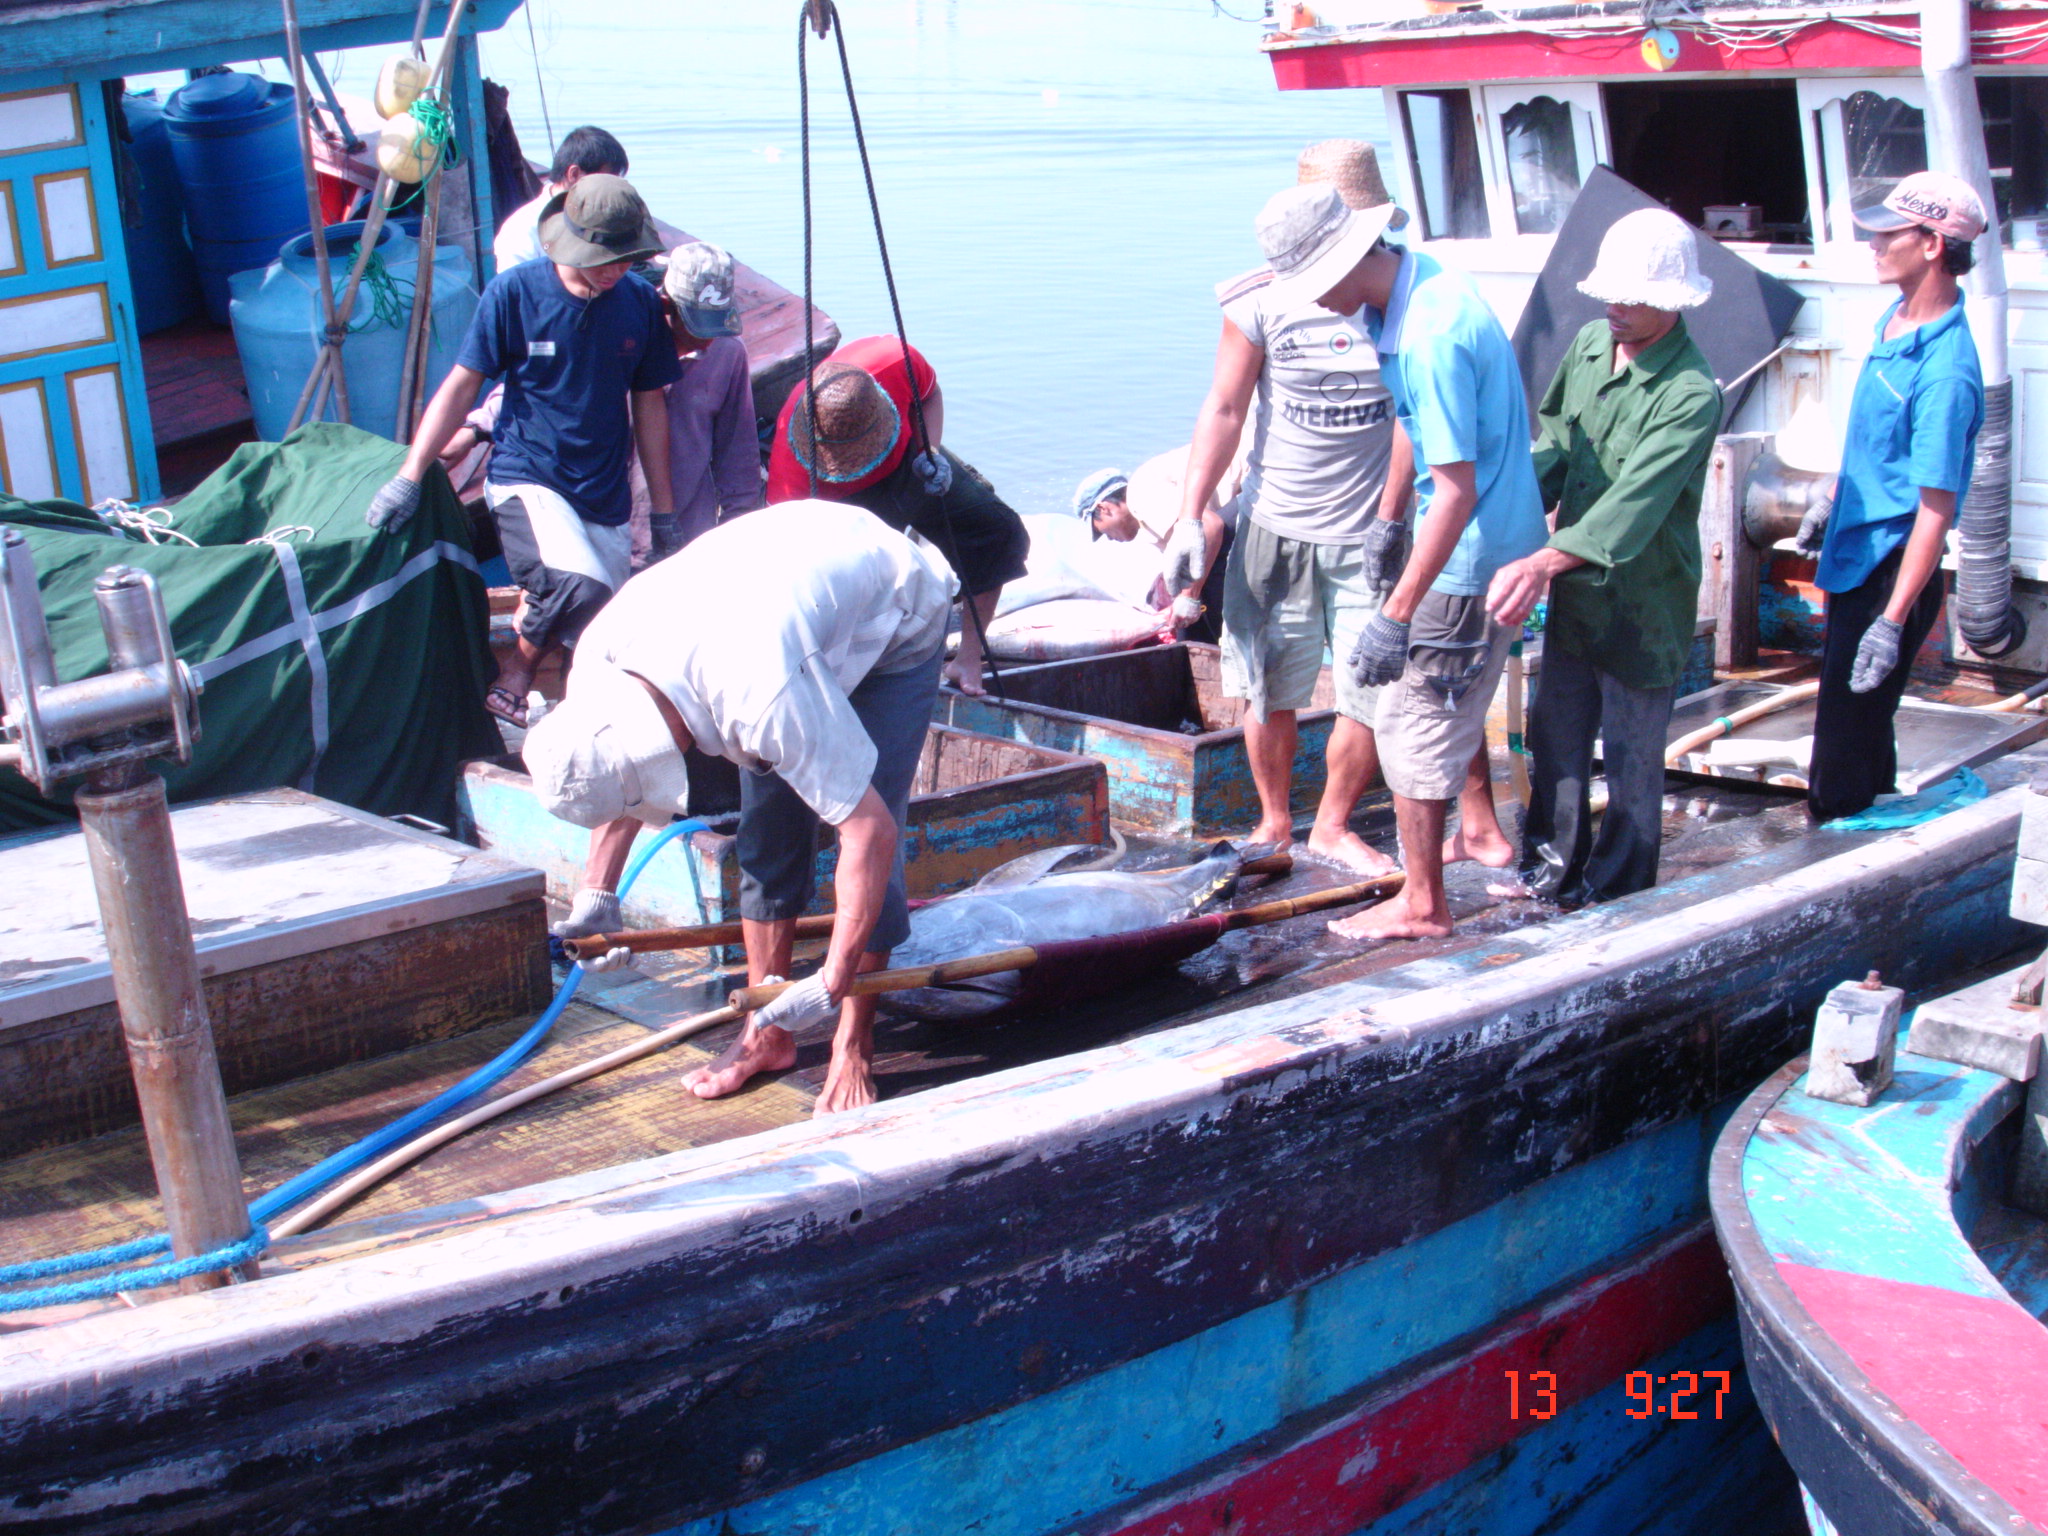 Shifting seafood exports to ASEAN